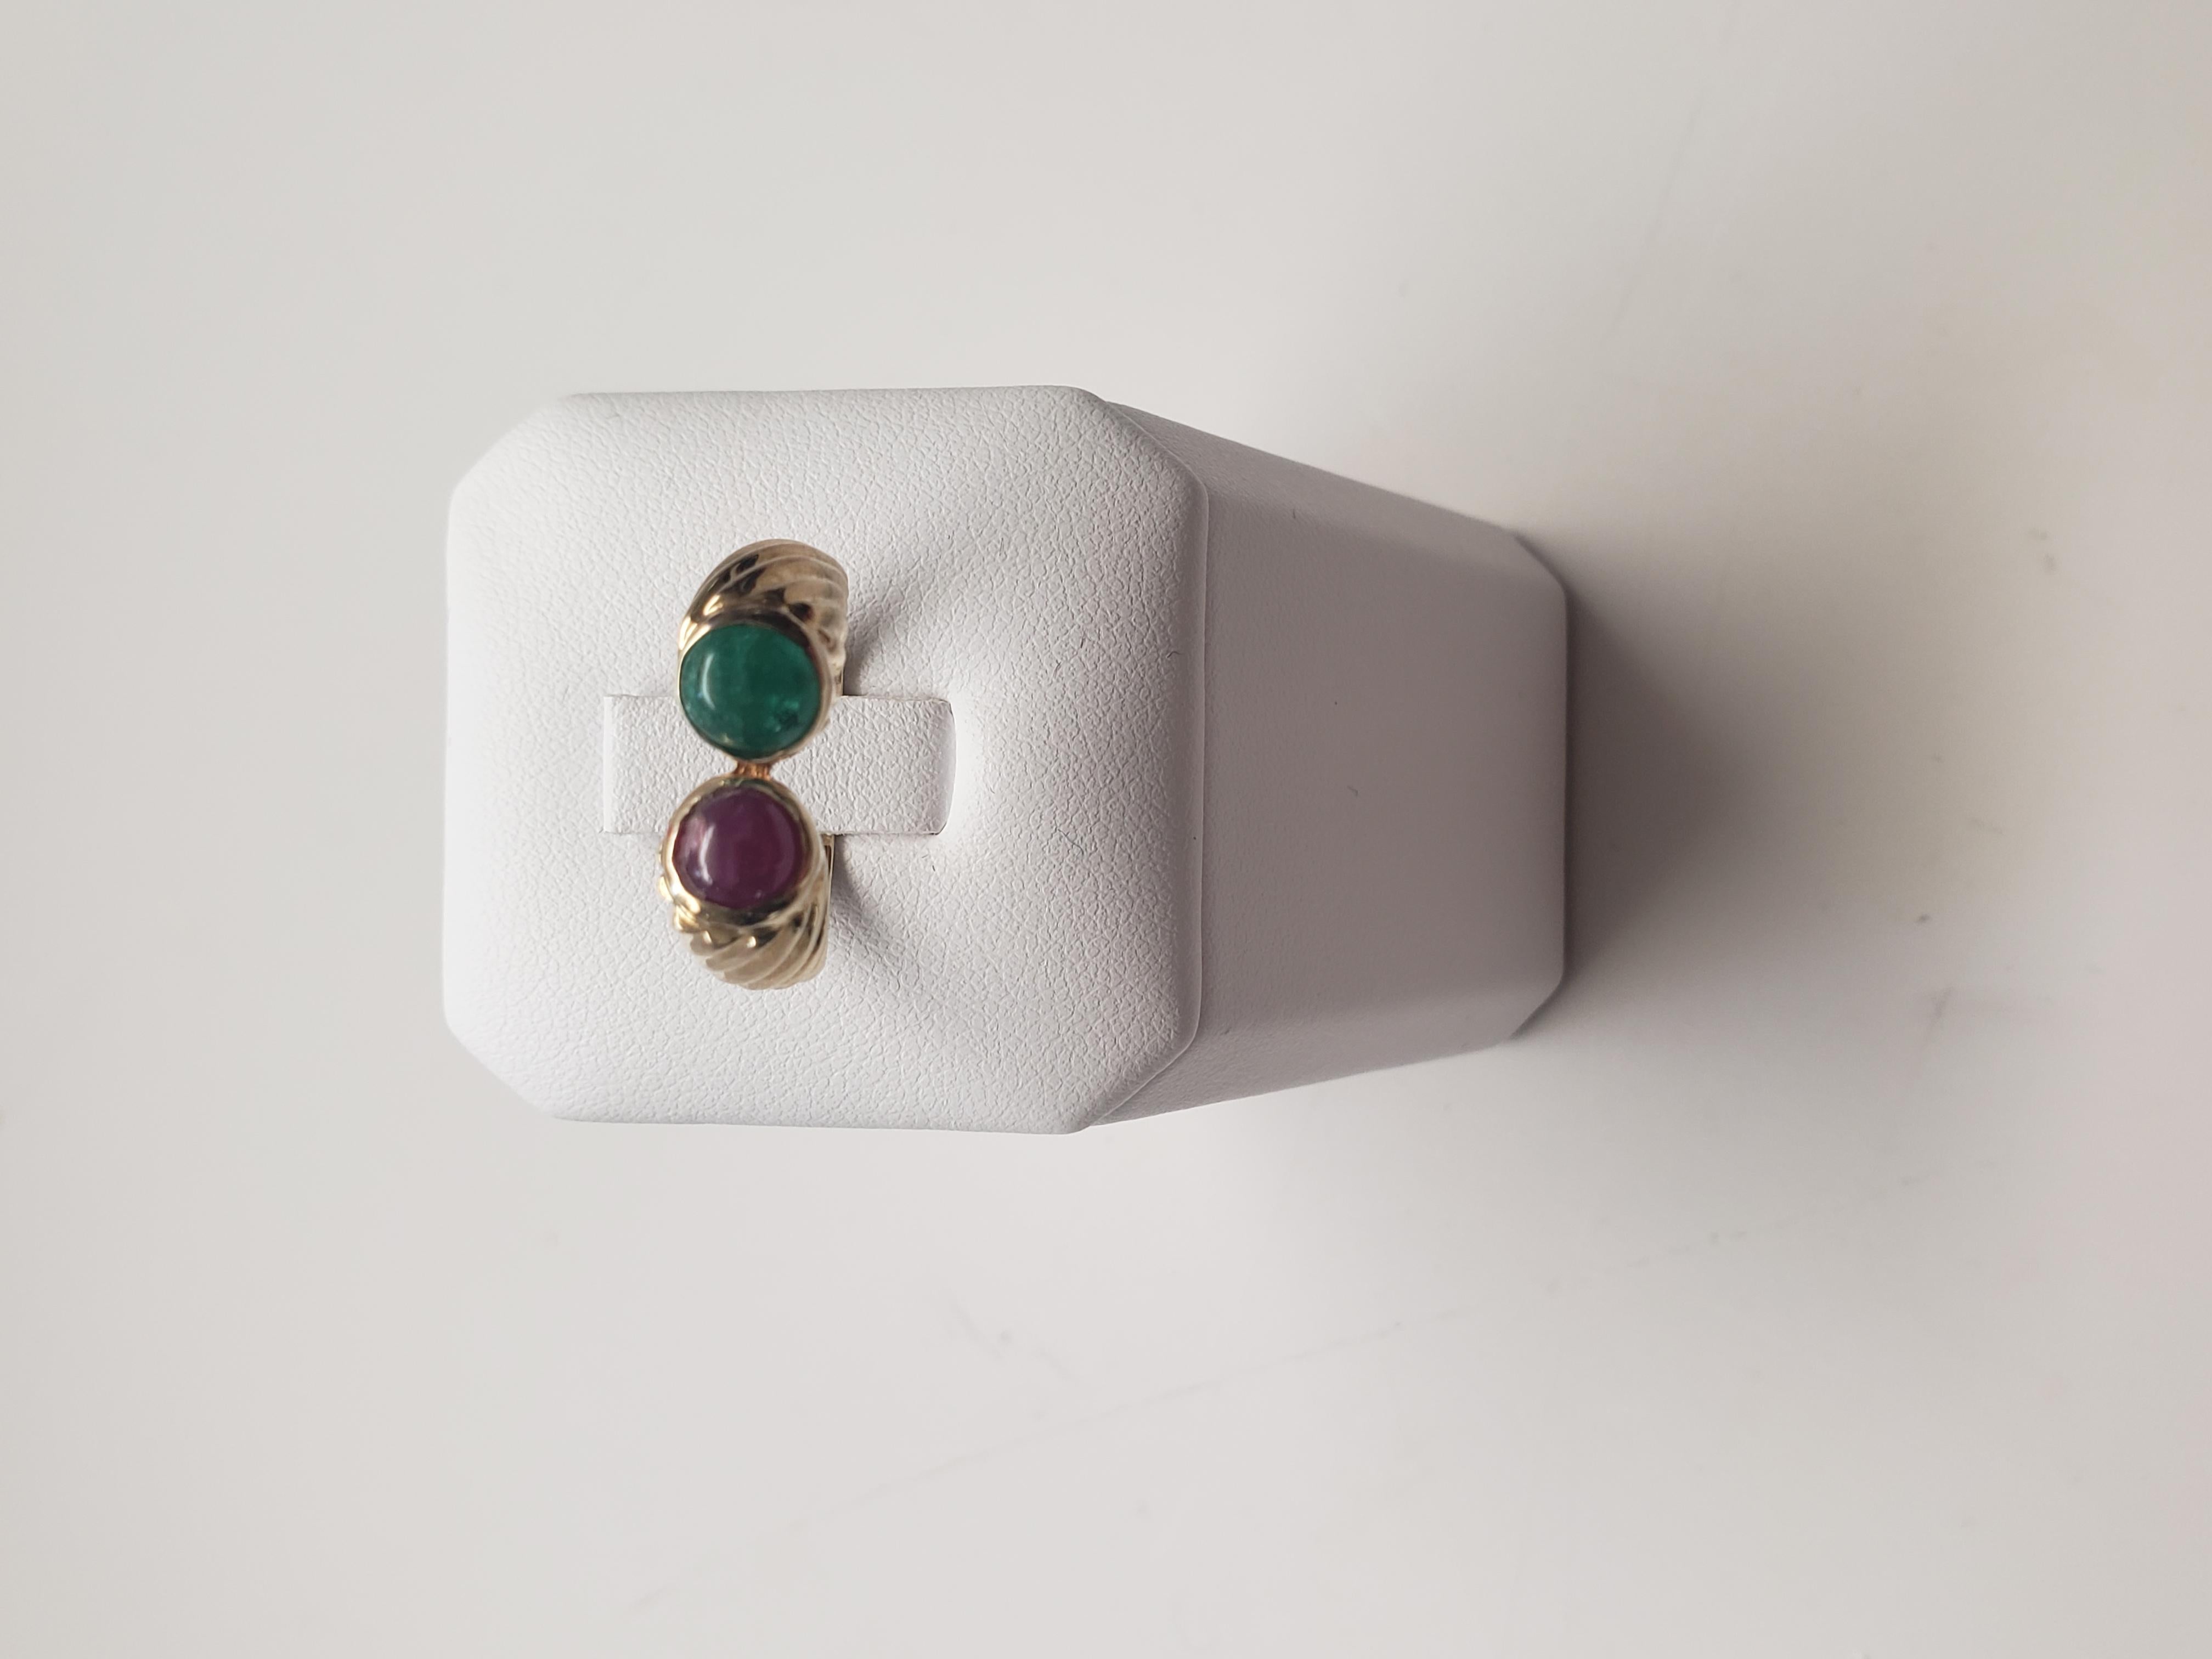 This stunning 14k solid yellow gold ring features a natural precious ruby and emerald set in a bezel setting. The red and green gemstones complement each other beautifully and make for a unique and eye-catching piece of jewelry. The ring is from the